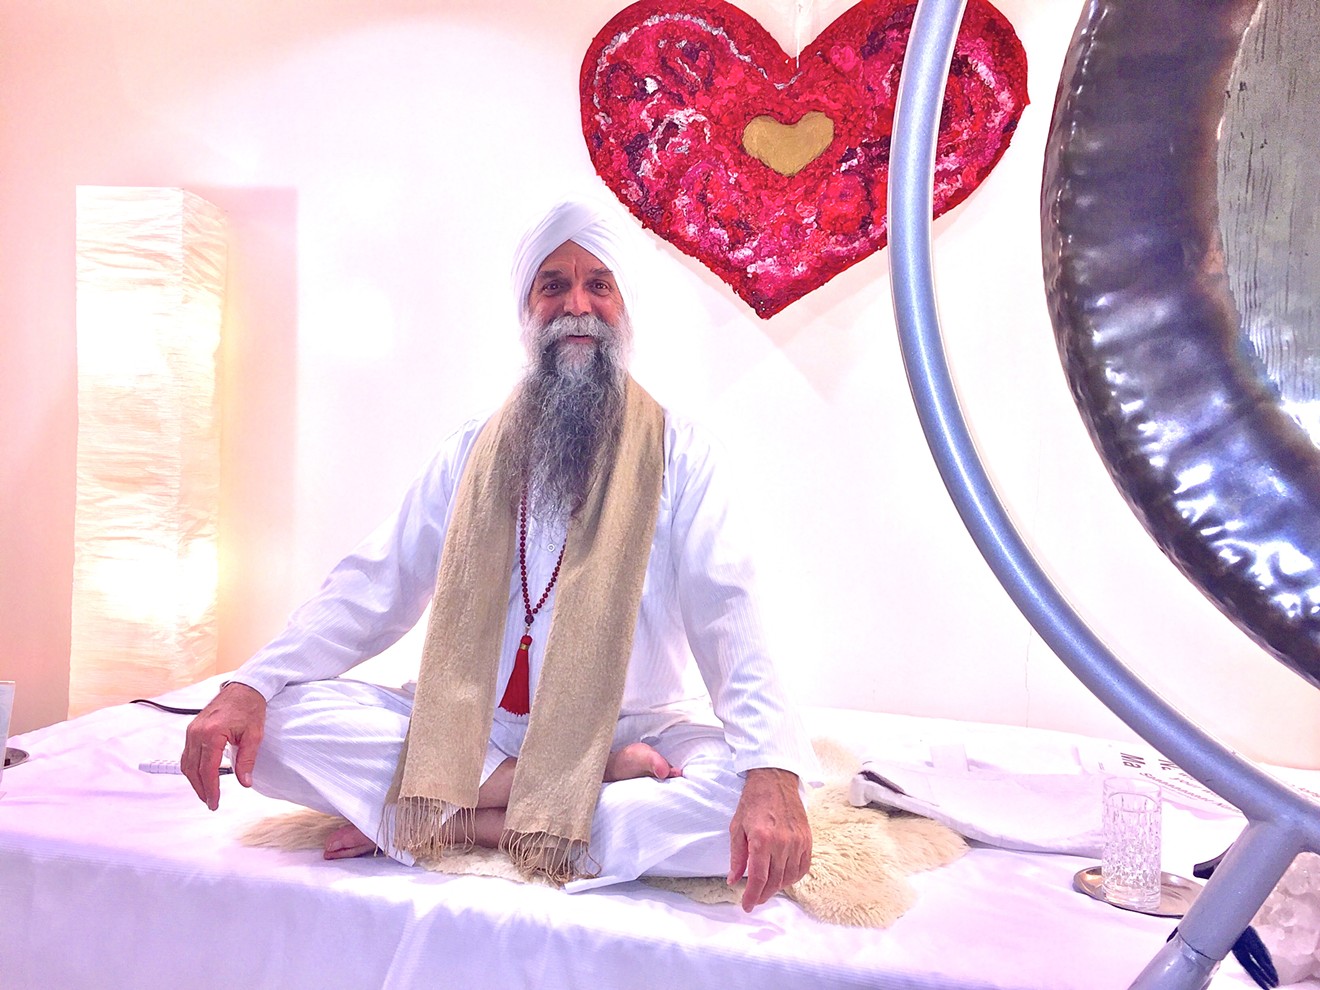 Kundalini yoga instructor Sevak Singh was among the original students of Yogi Bhajan, who first brought the practice to the U.S. from India in the late 1960s.